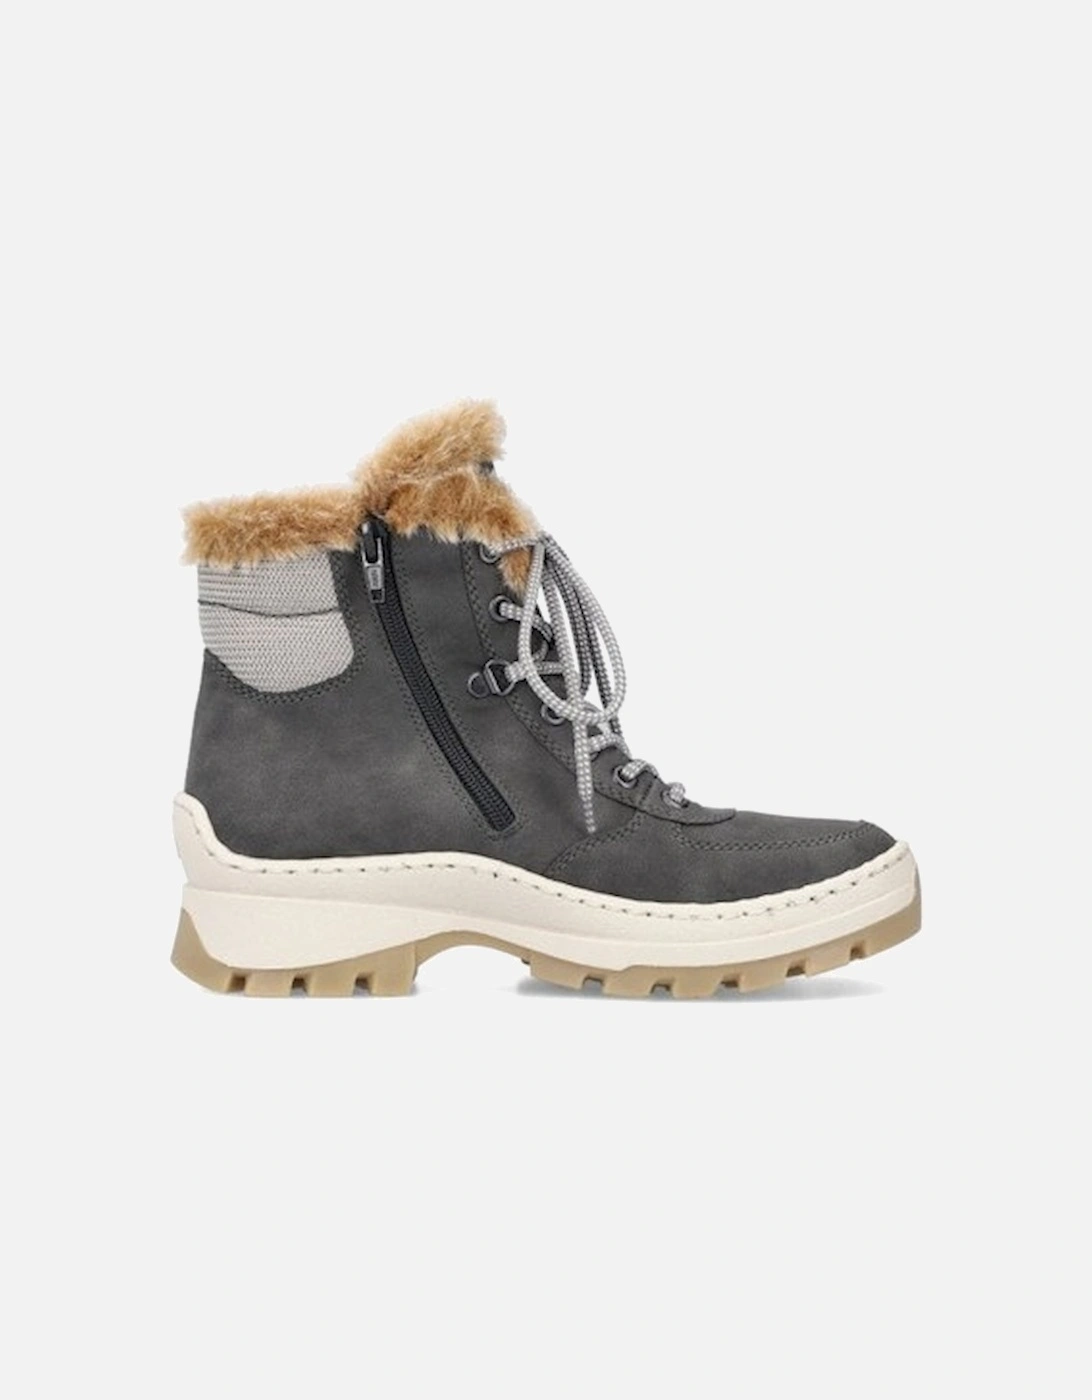 Women's Fur Lined Ankle Boot Grey